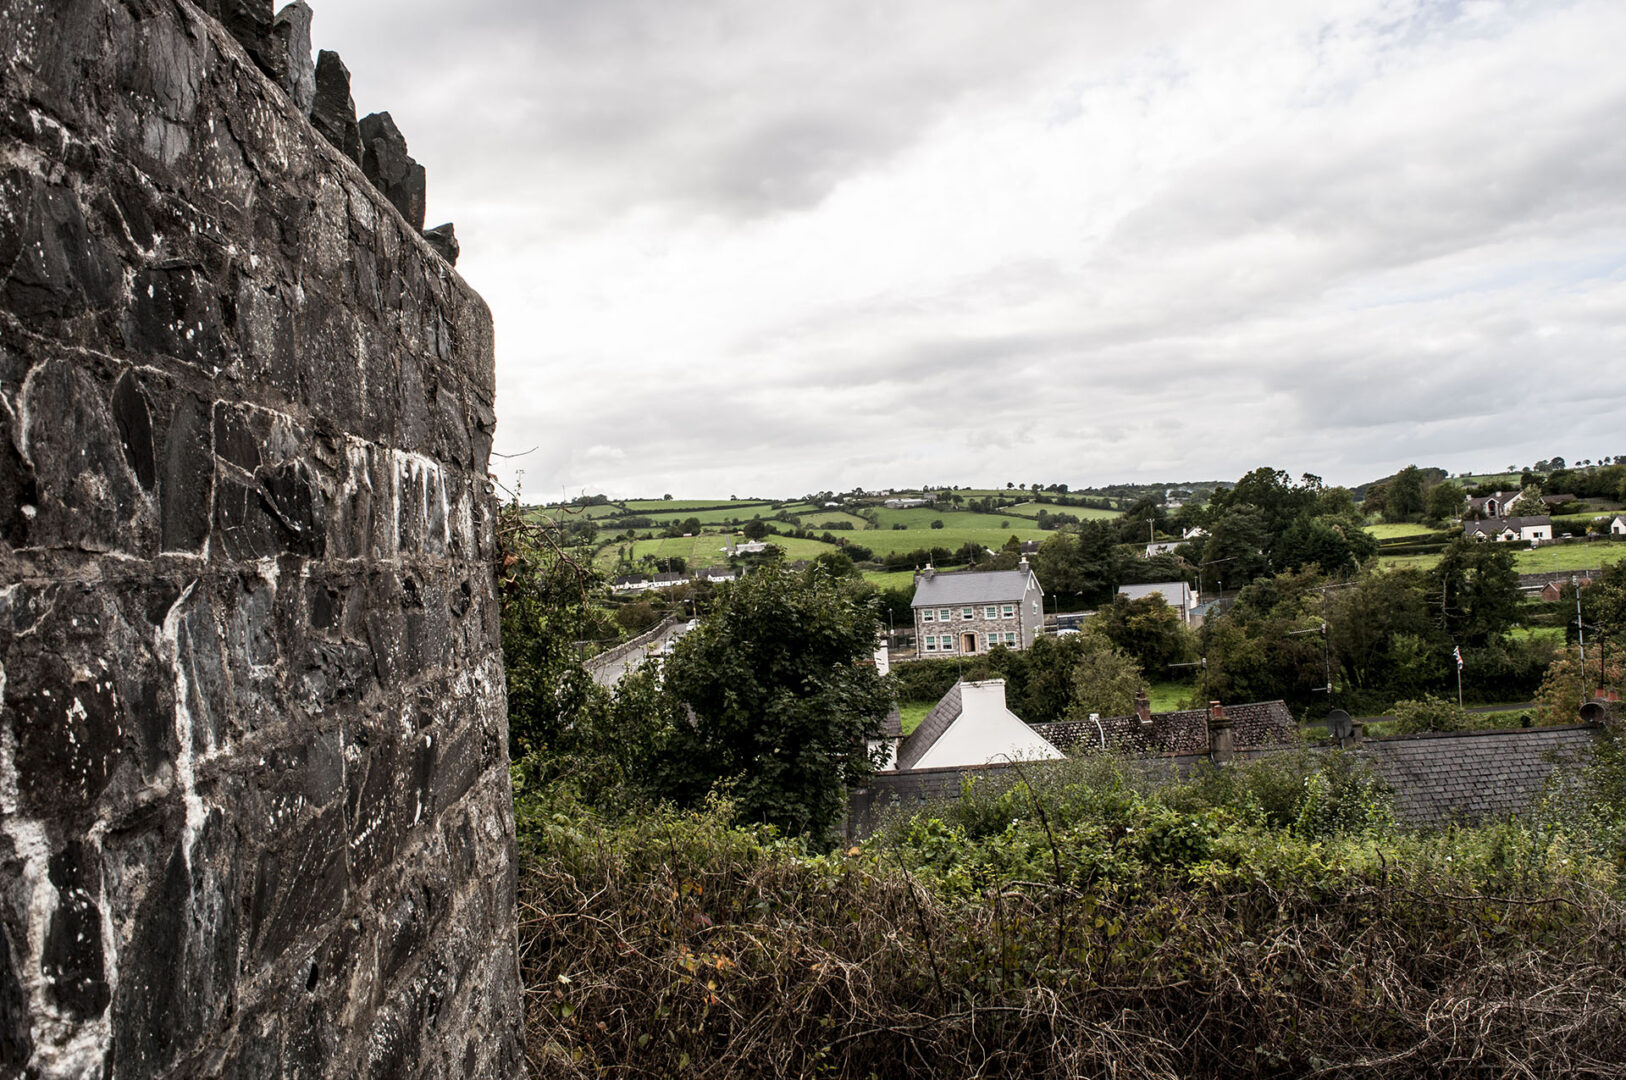 Views from the site of a pillbox overlooking roads in and out of the village of Scarva, Co. Down.